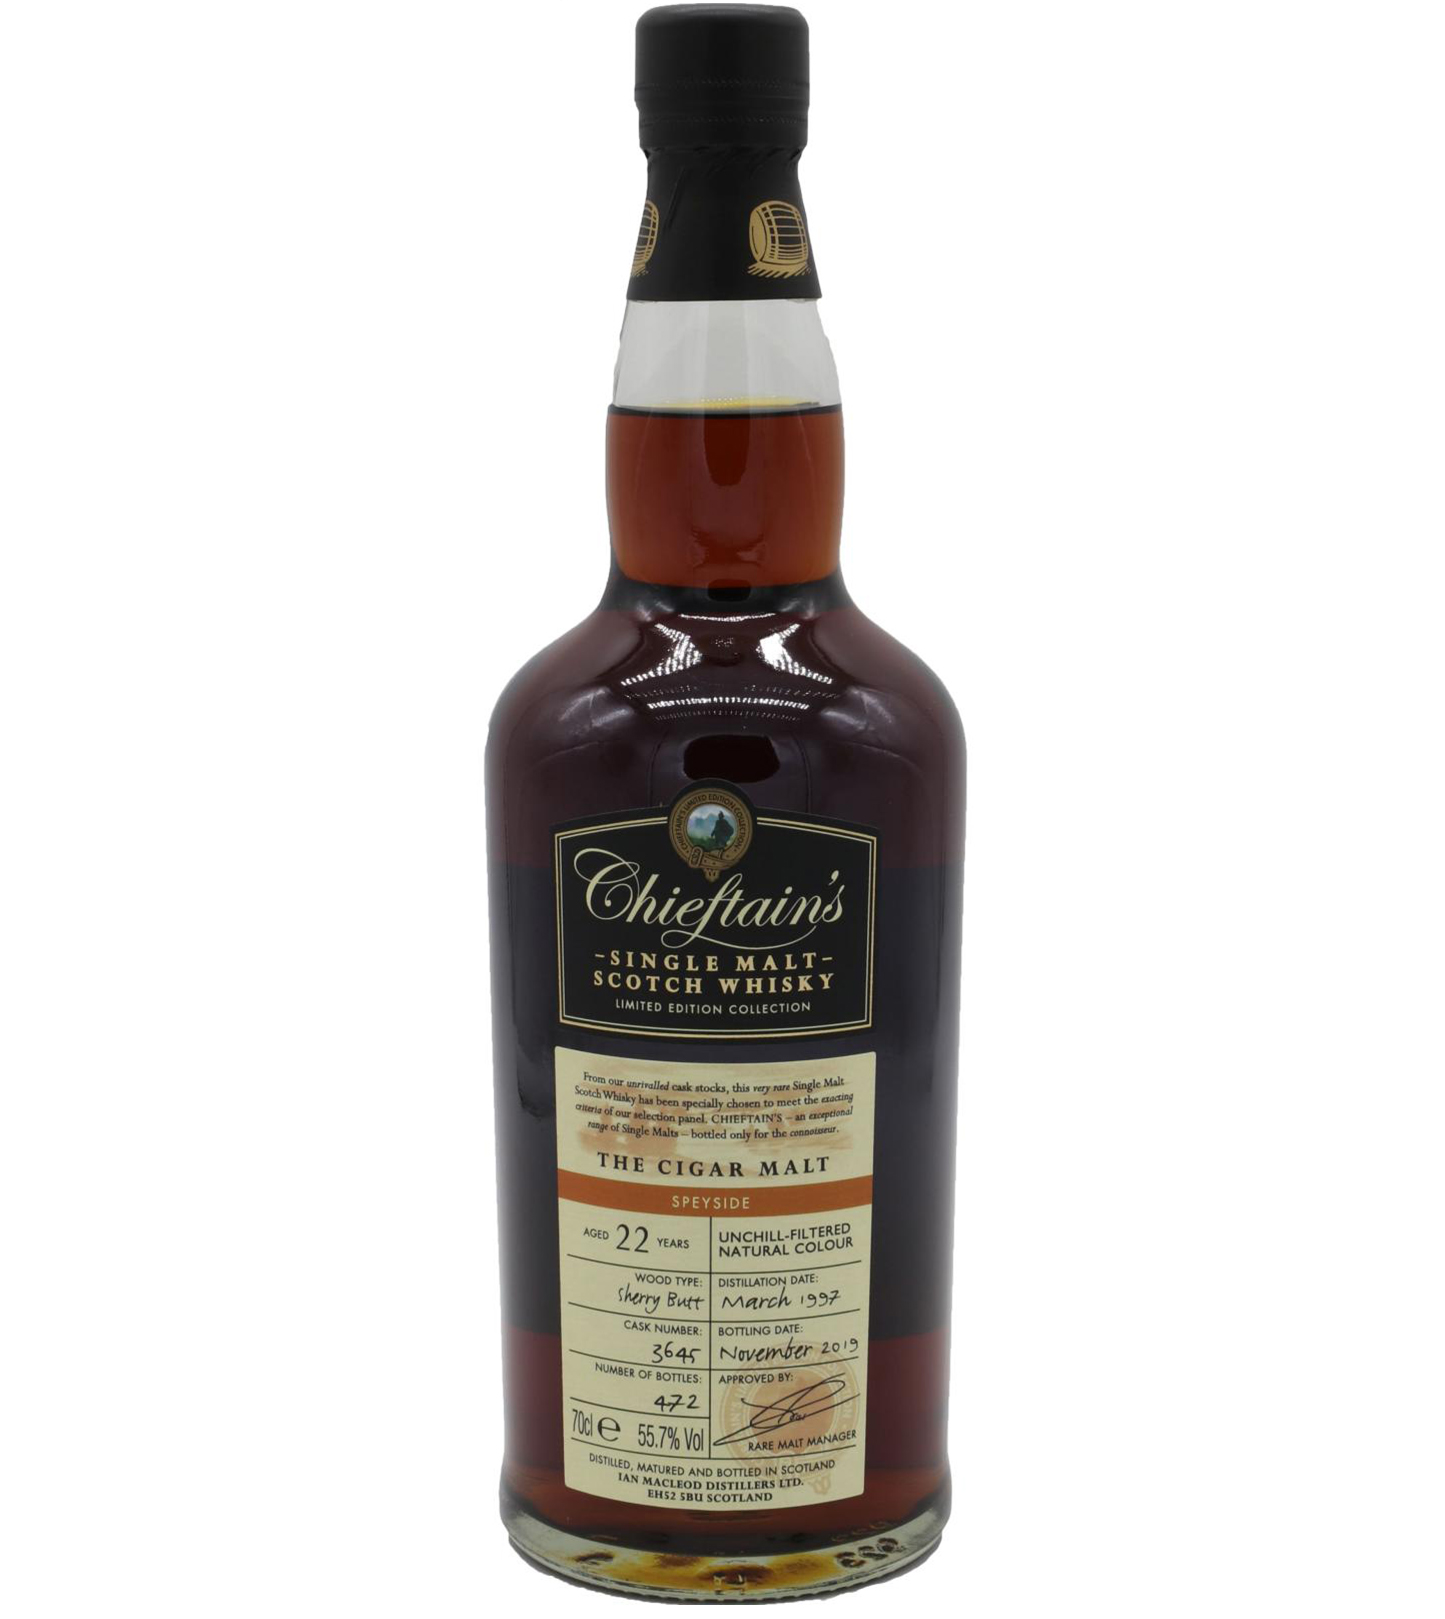 You are currently viewing The Cigar Malt 1997 22 years – cask #3645